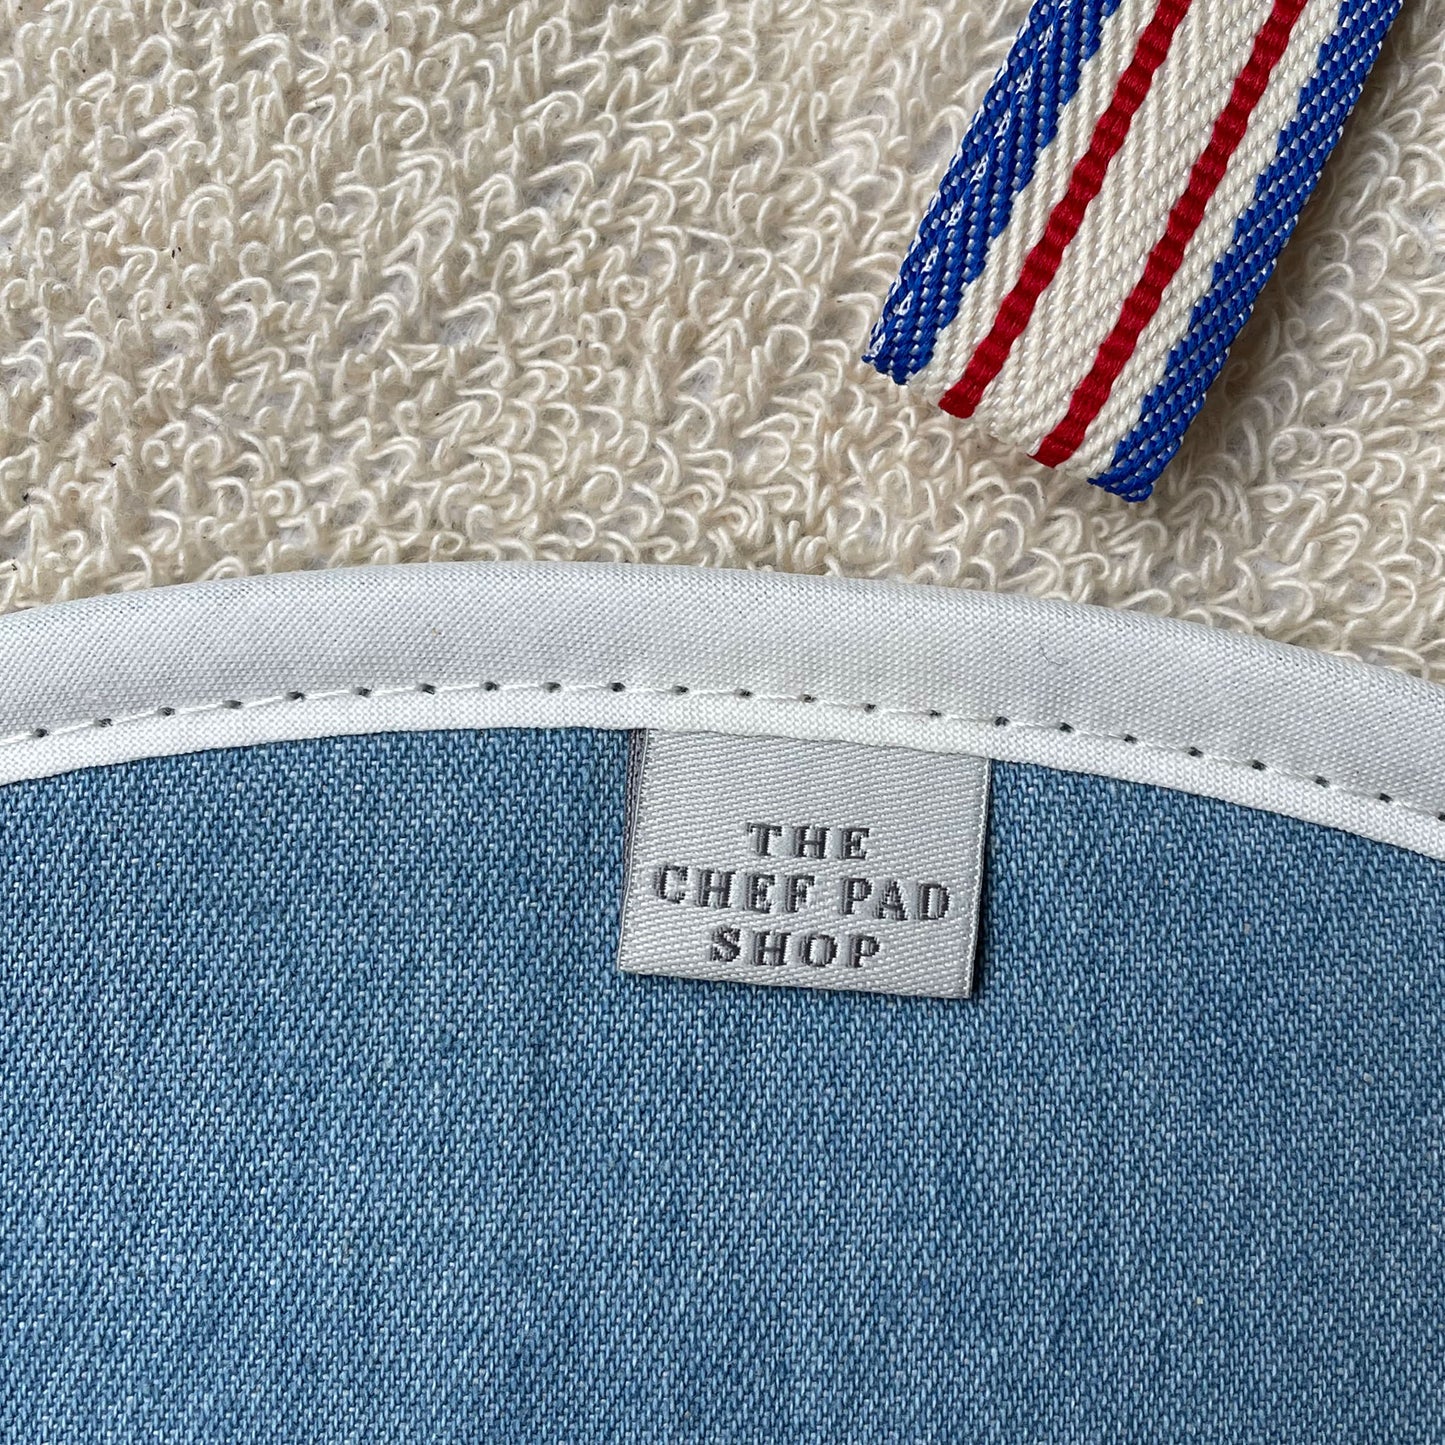 Chef Pad - Aga - The Chef Pad Shop - Light Denim Chef Pad for use with Aga range cookers